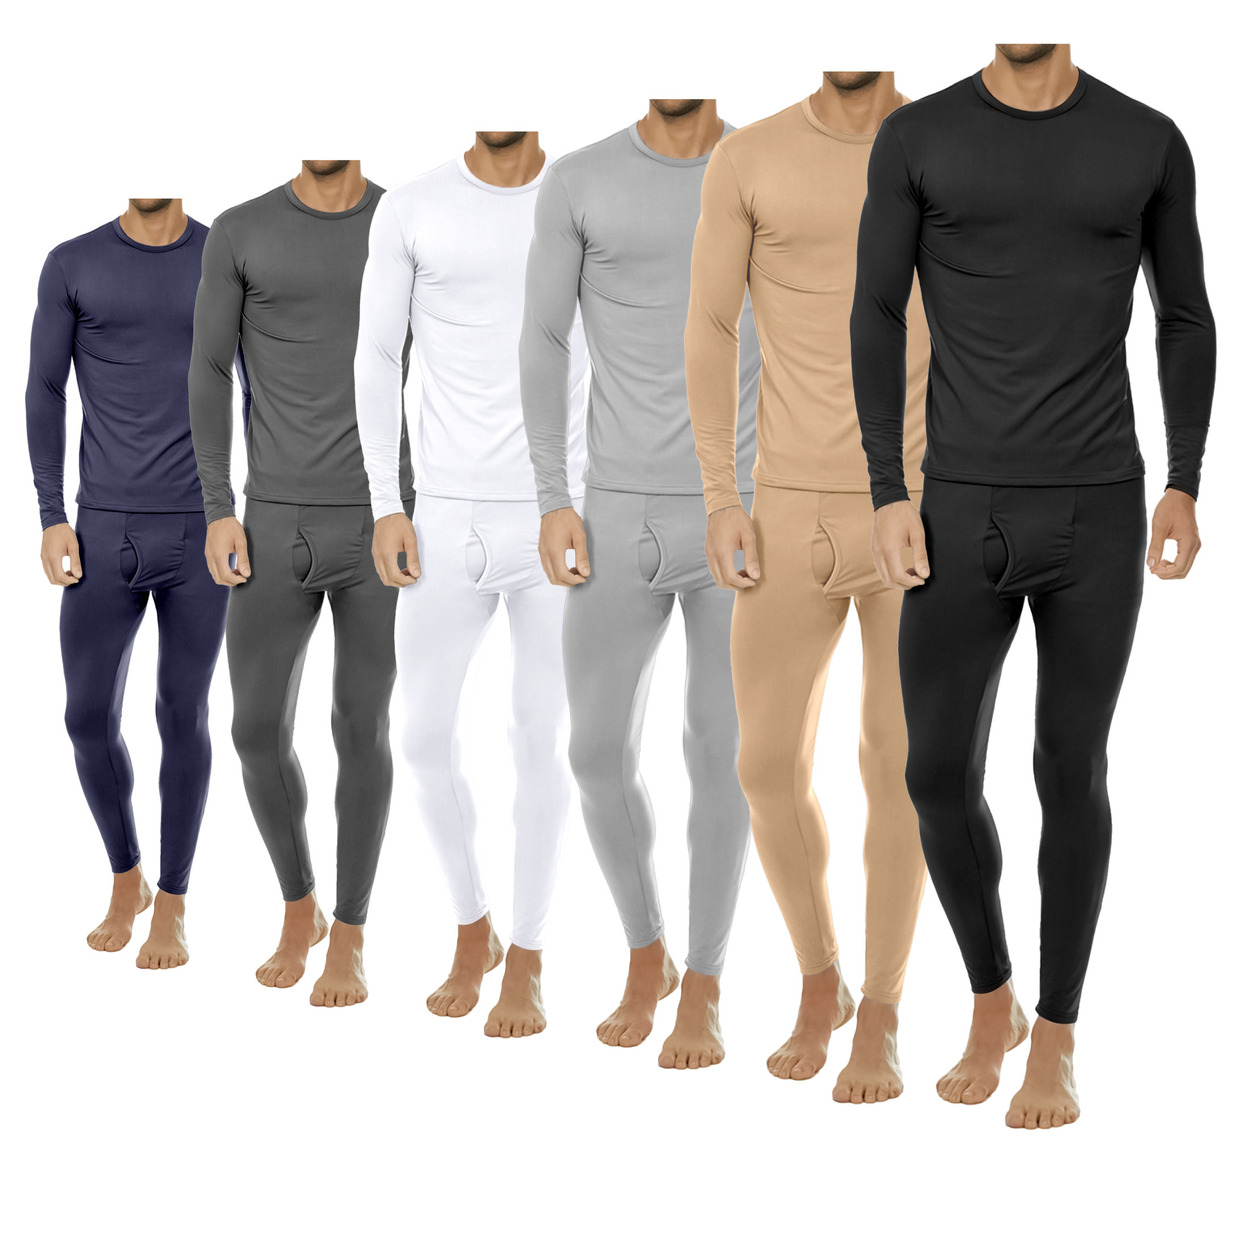 2-Sets: Men's Winter Warm Fleece Lined Thermal Underwear Set For Cold Weather - Black&grey, X-large